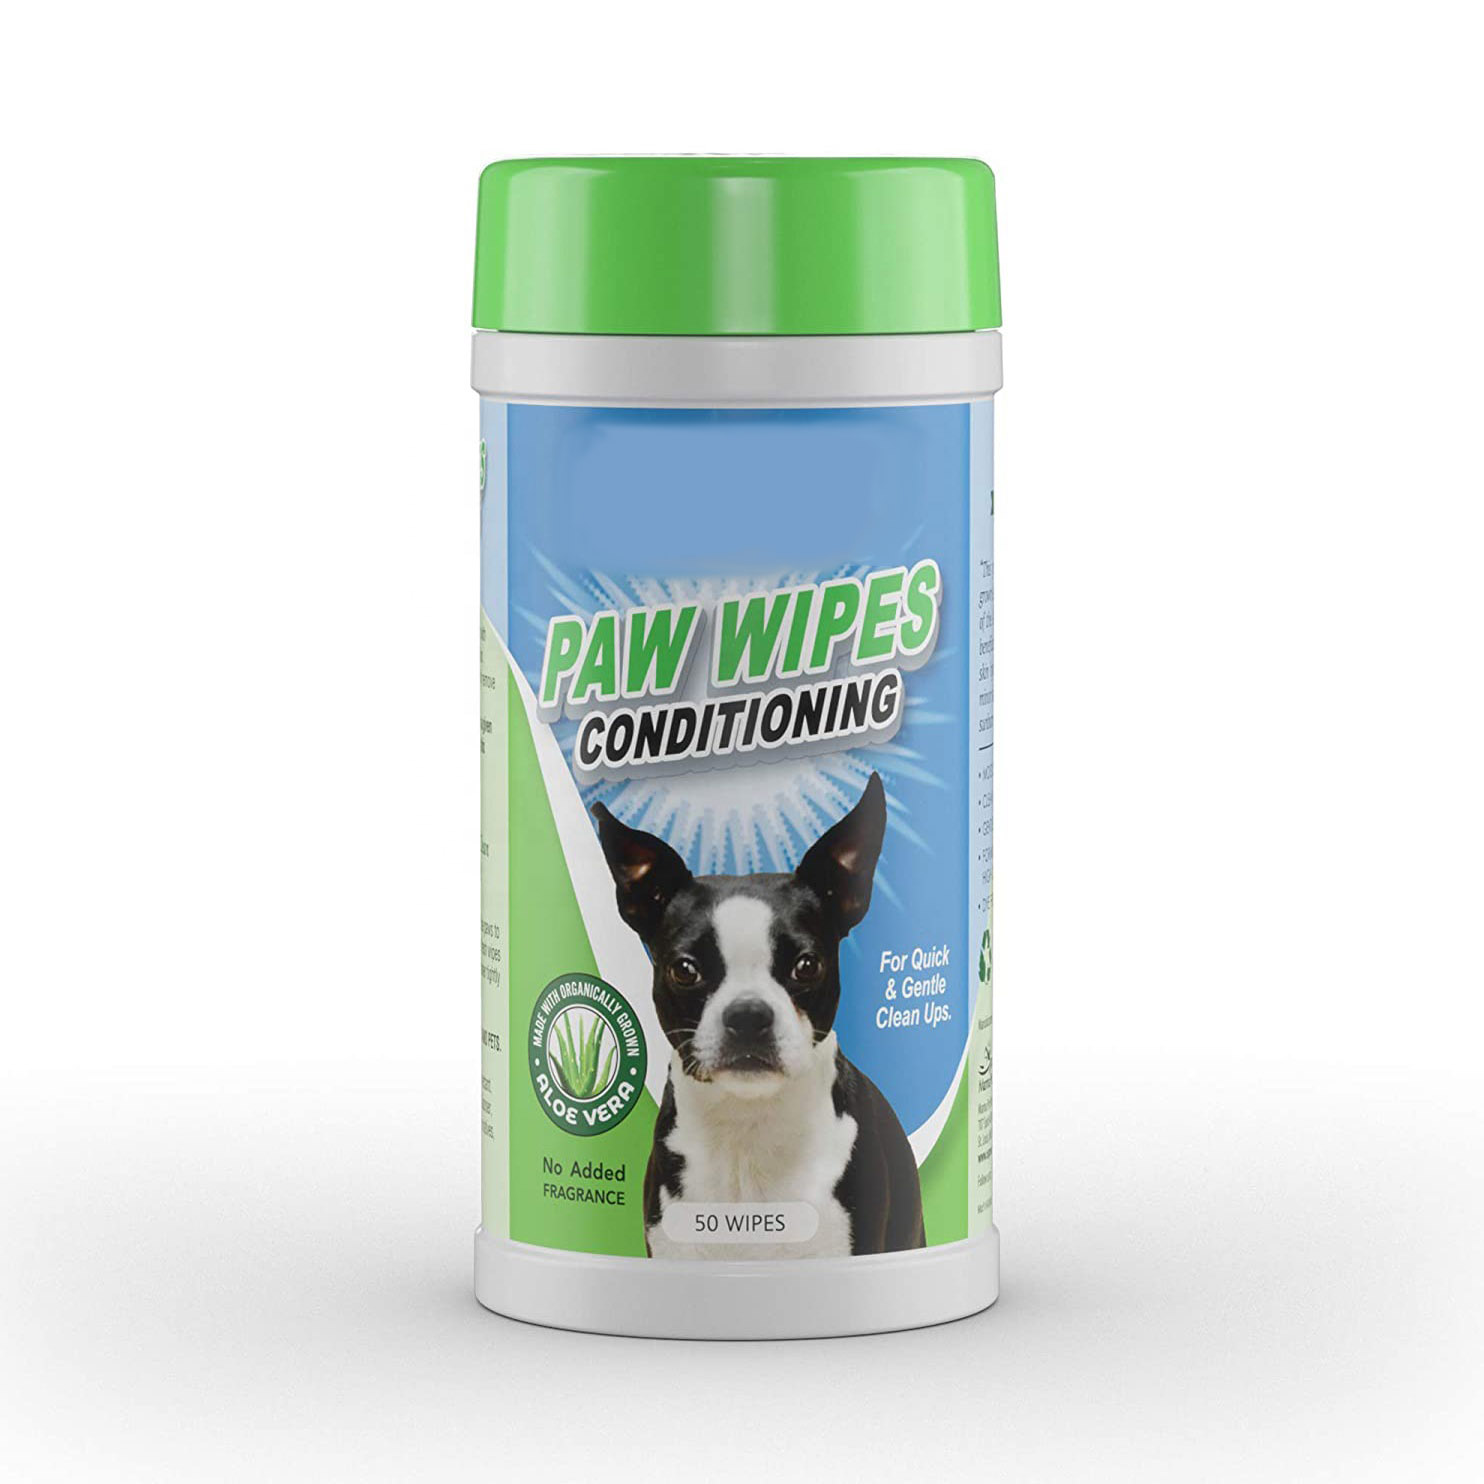 Multipurpose Pet Puppy Wipes for Grooming